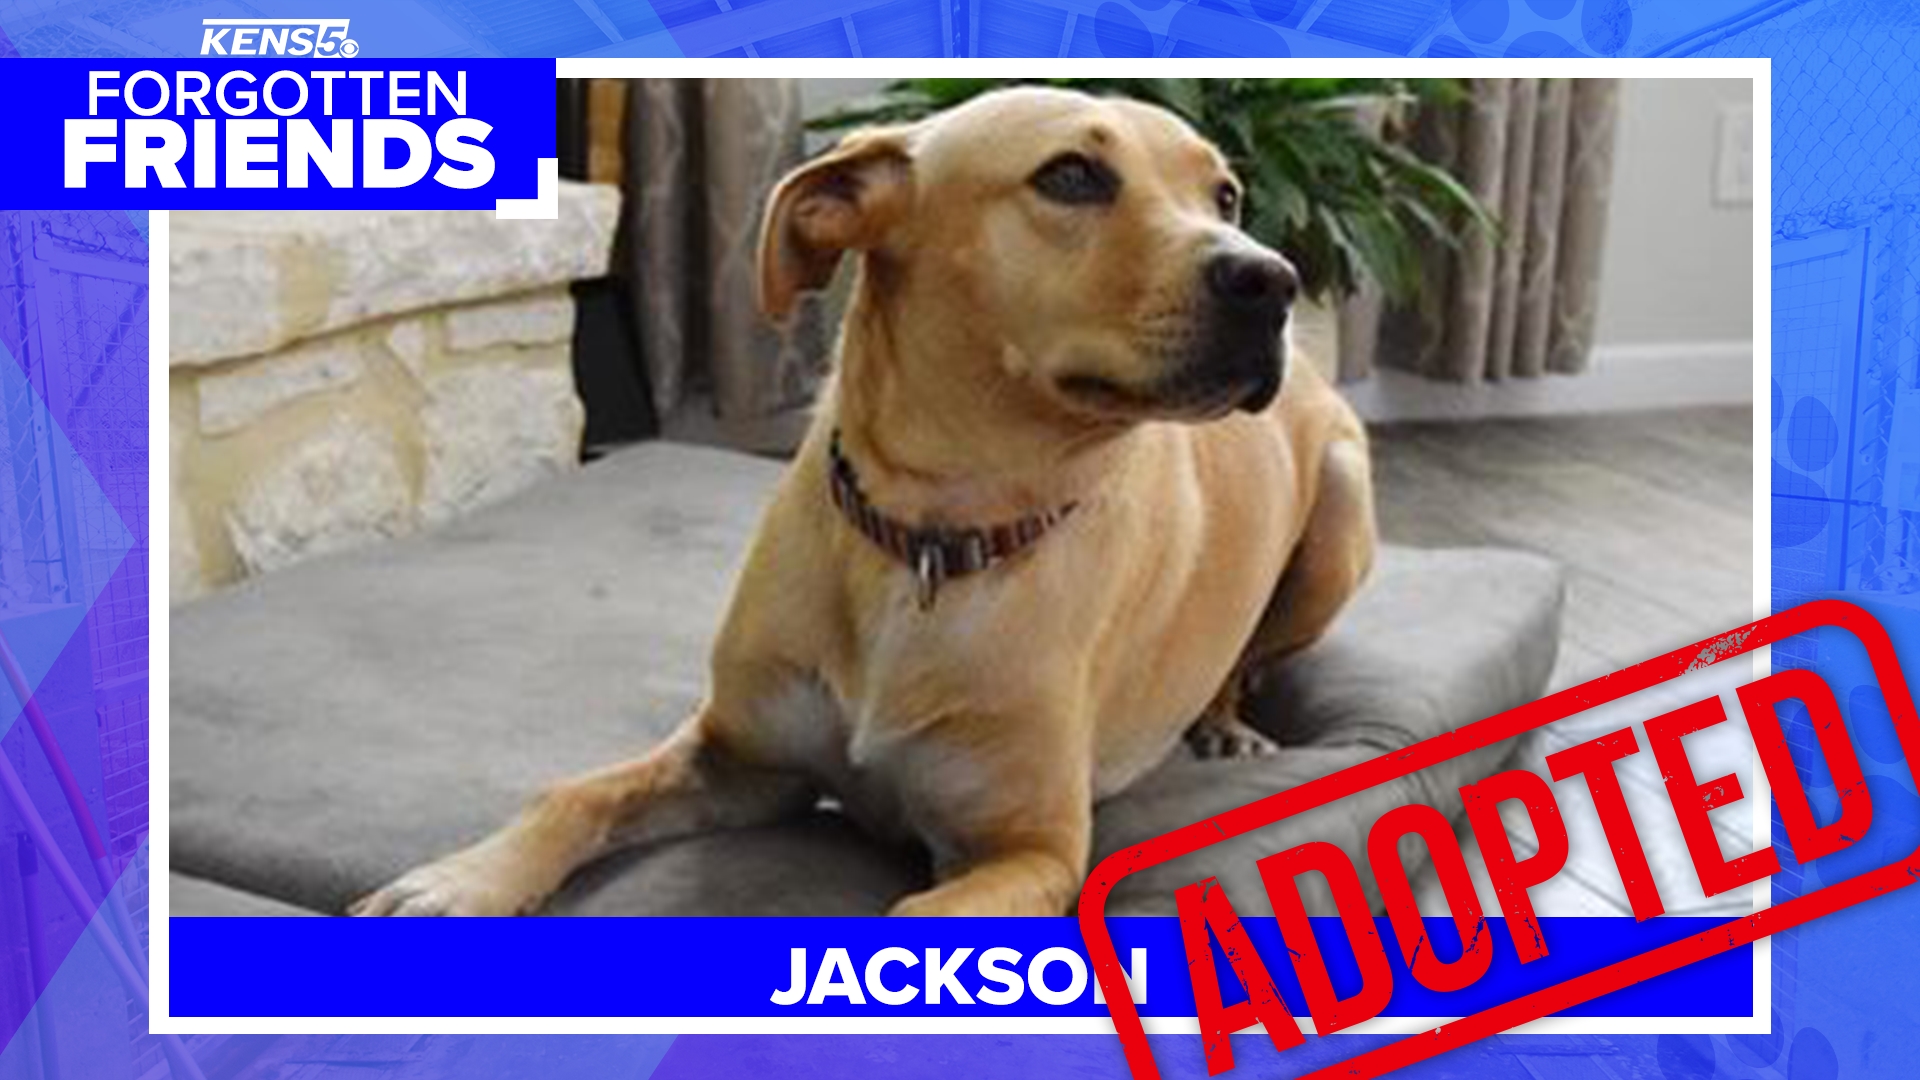 Forgotten Friends: Jackson the tripod dog adopted after 464 days at shelter